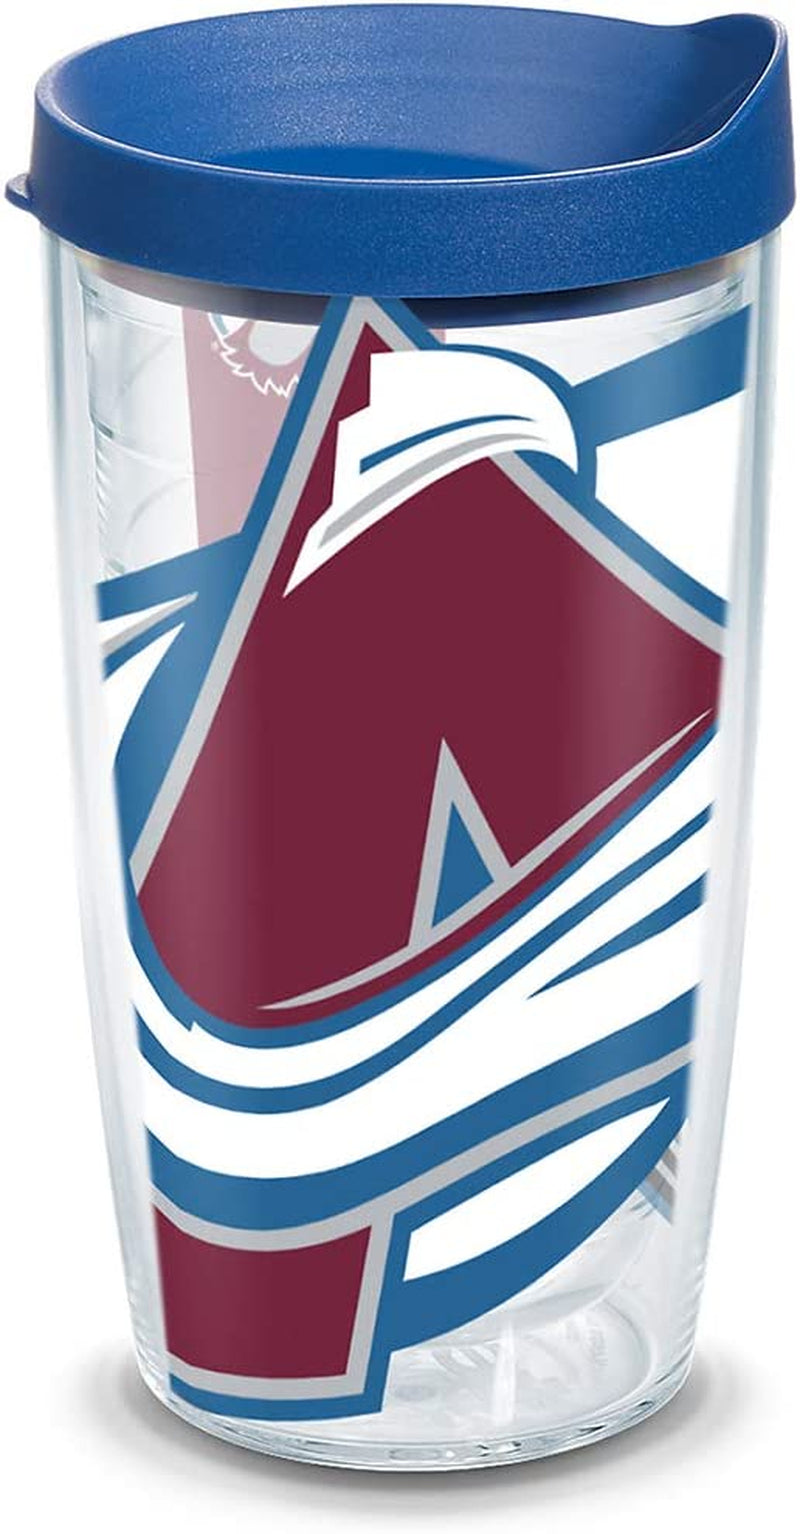 Tervis Made in USA Double Walled NHL Colorado Avalanche Insulated Tumbler Cup Keeps Drinks Cold & Hot, 24Oz, Colossal